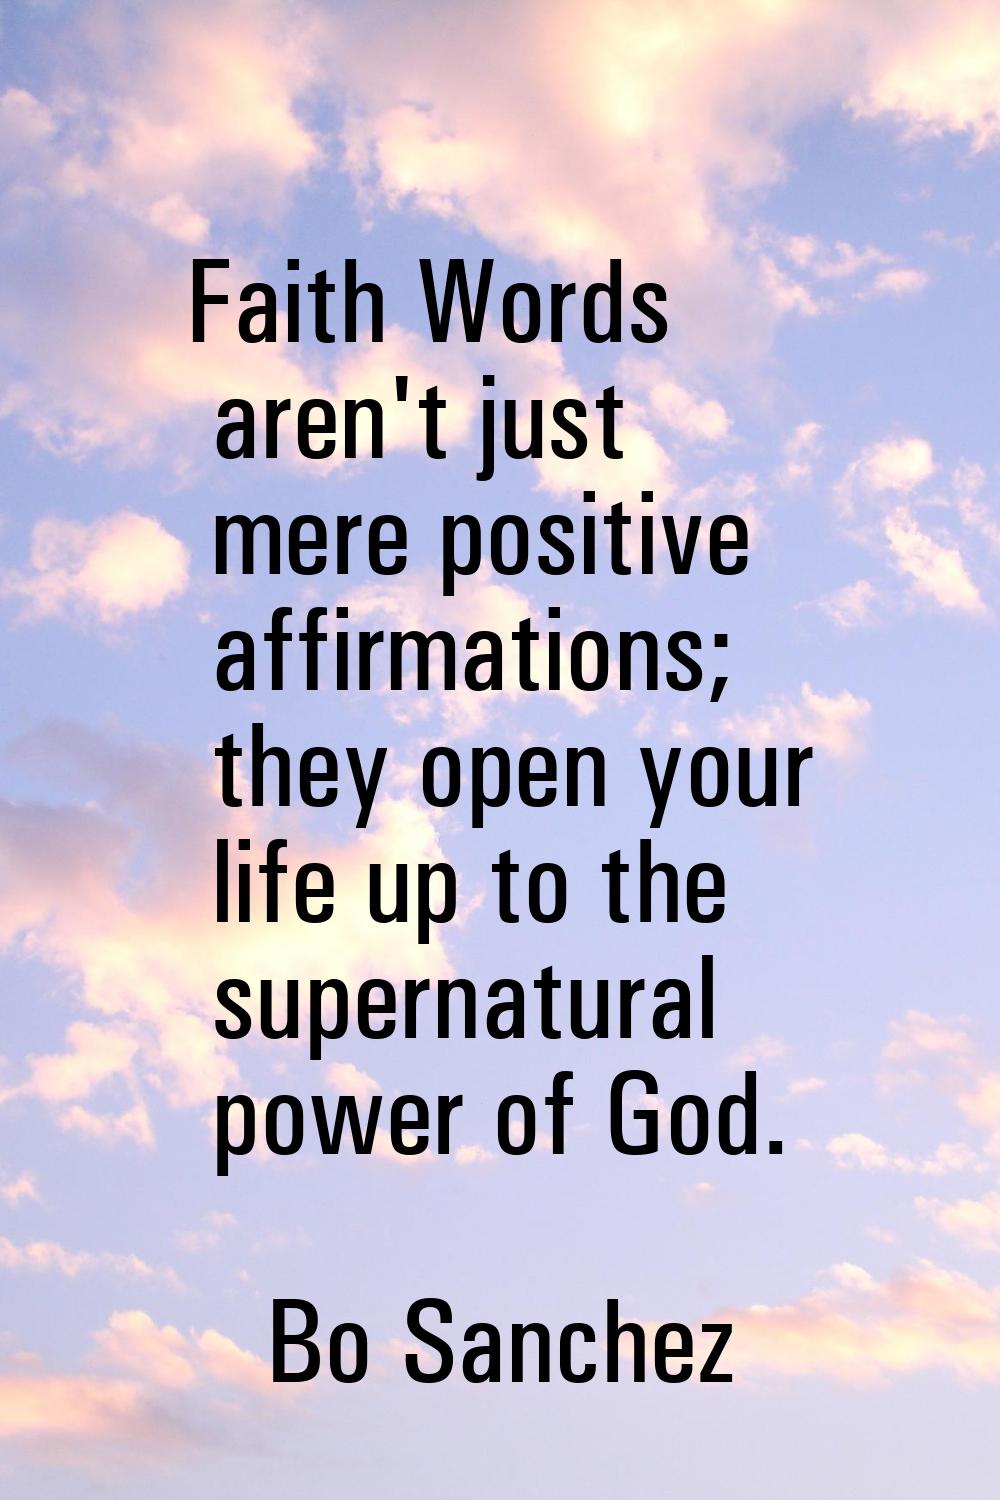 Faith Words aren't just mere positive affirmations; they open your life up to the supernatural powe